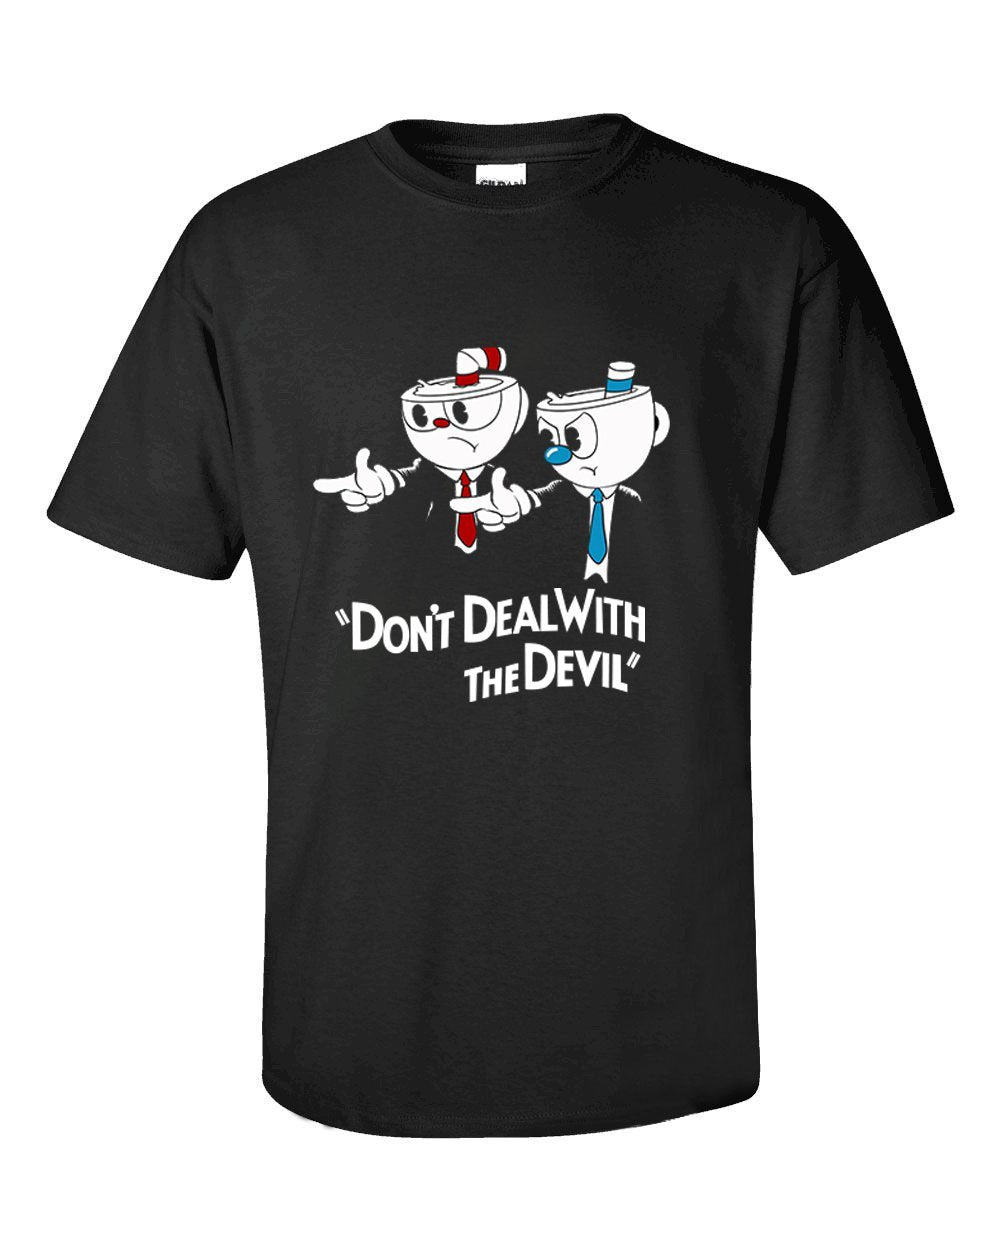 Cup Head Don't Deal with the Devil Black T-shirt (Free Ship )